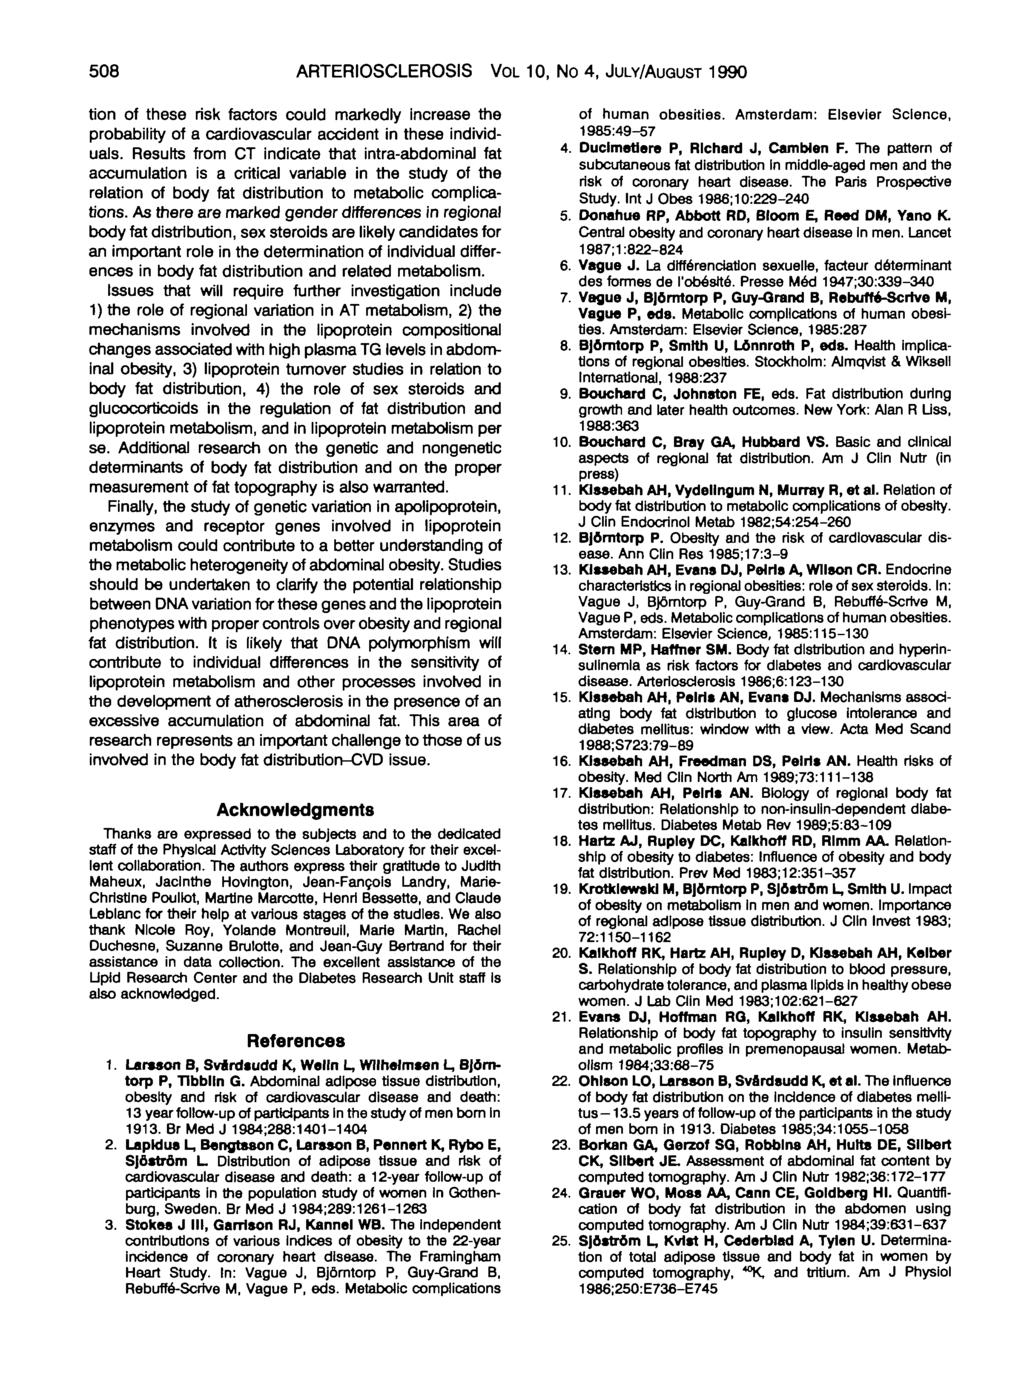 508 ARTERIOSCLEROSIS VOL 10, No 4, JULY/AUGUST 1990 tion of these risk factors could markedly increase the probability of a cardiovascular accident in these individuals.